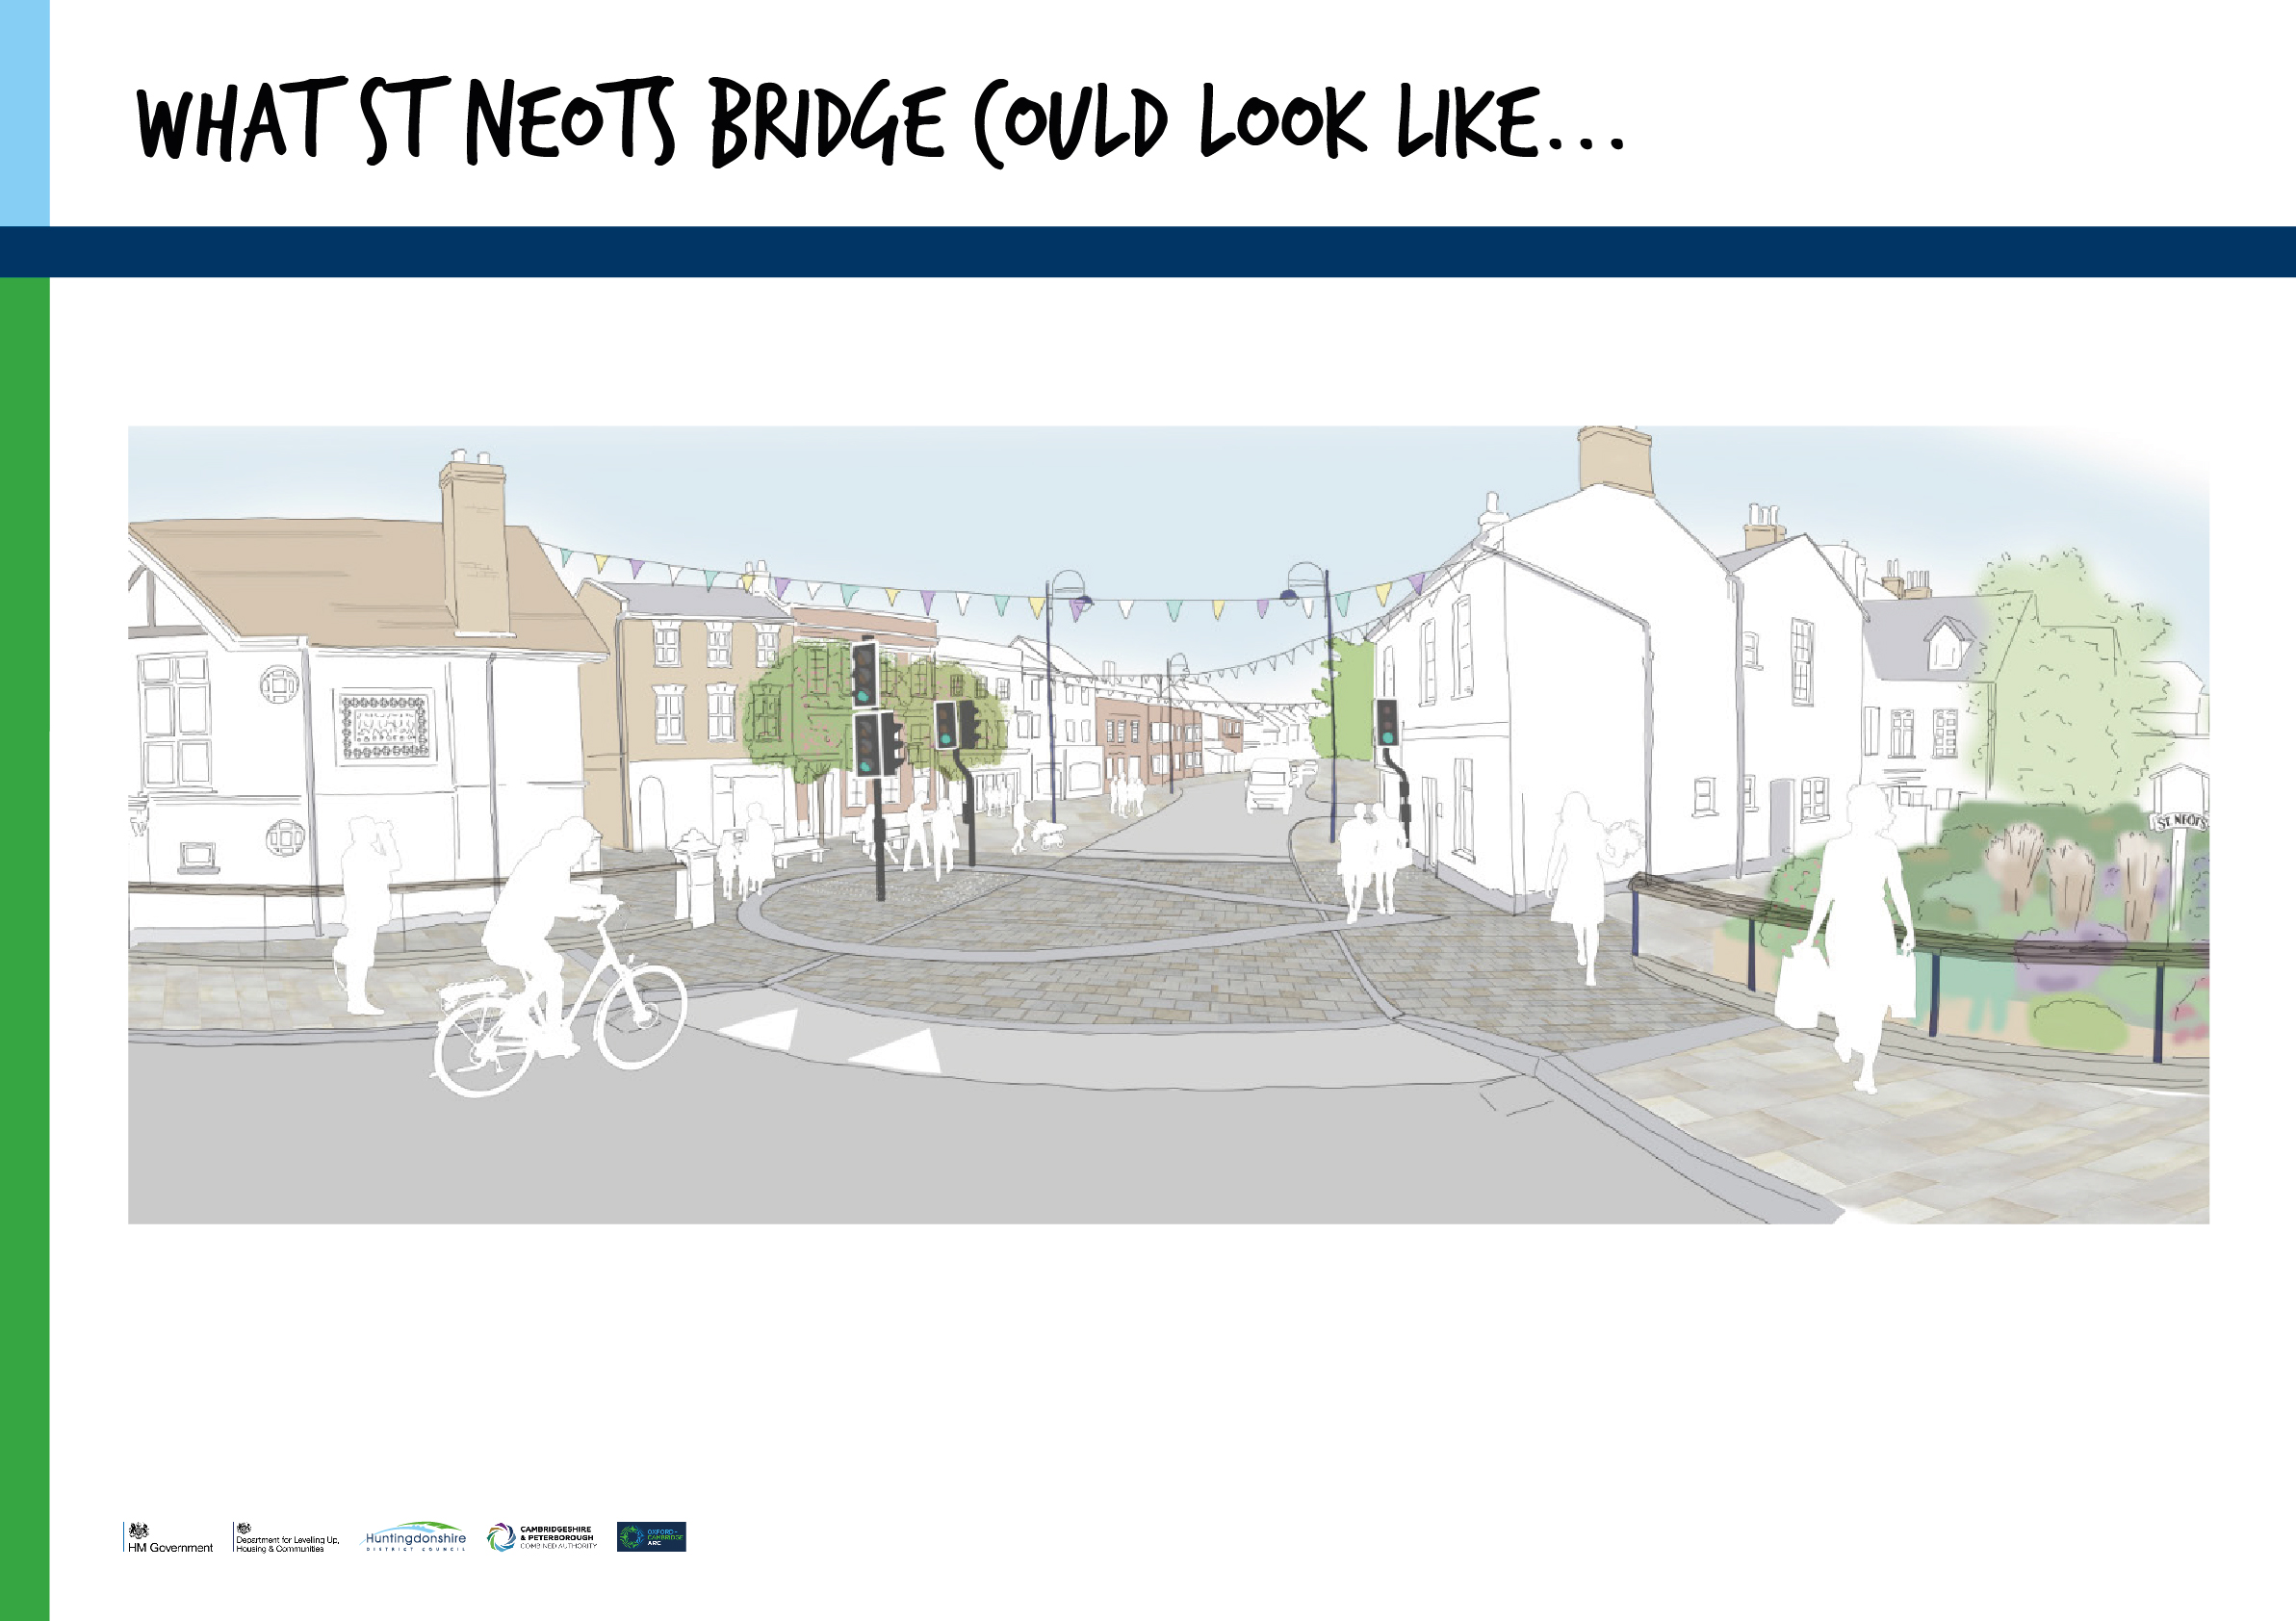 What St Neots Bridge could look like. Image showing a mock-up of the bridge and surrounding area.